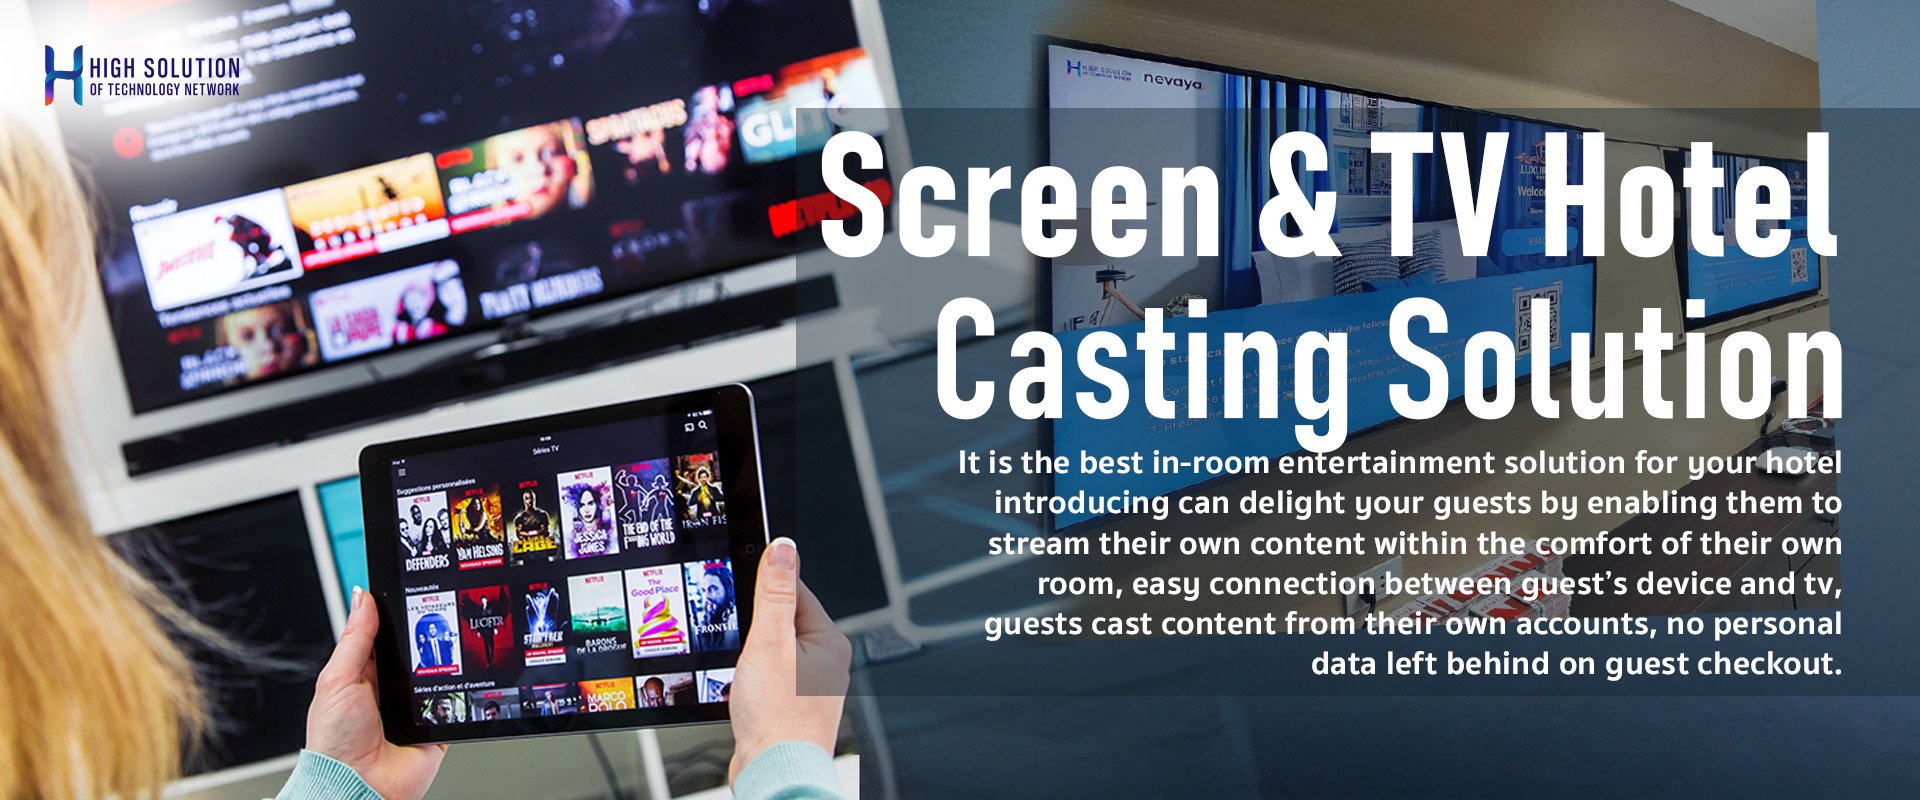 Screen_Tv_Hotel_Casting_Solution_By_Highsolution